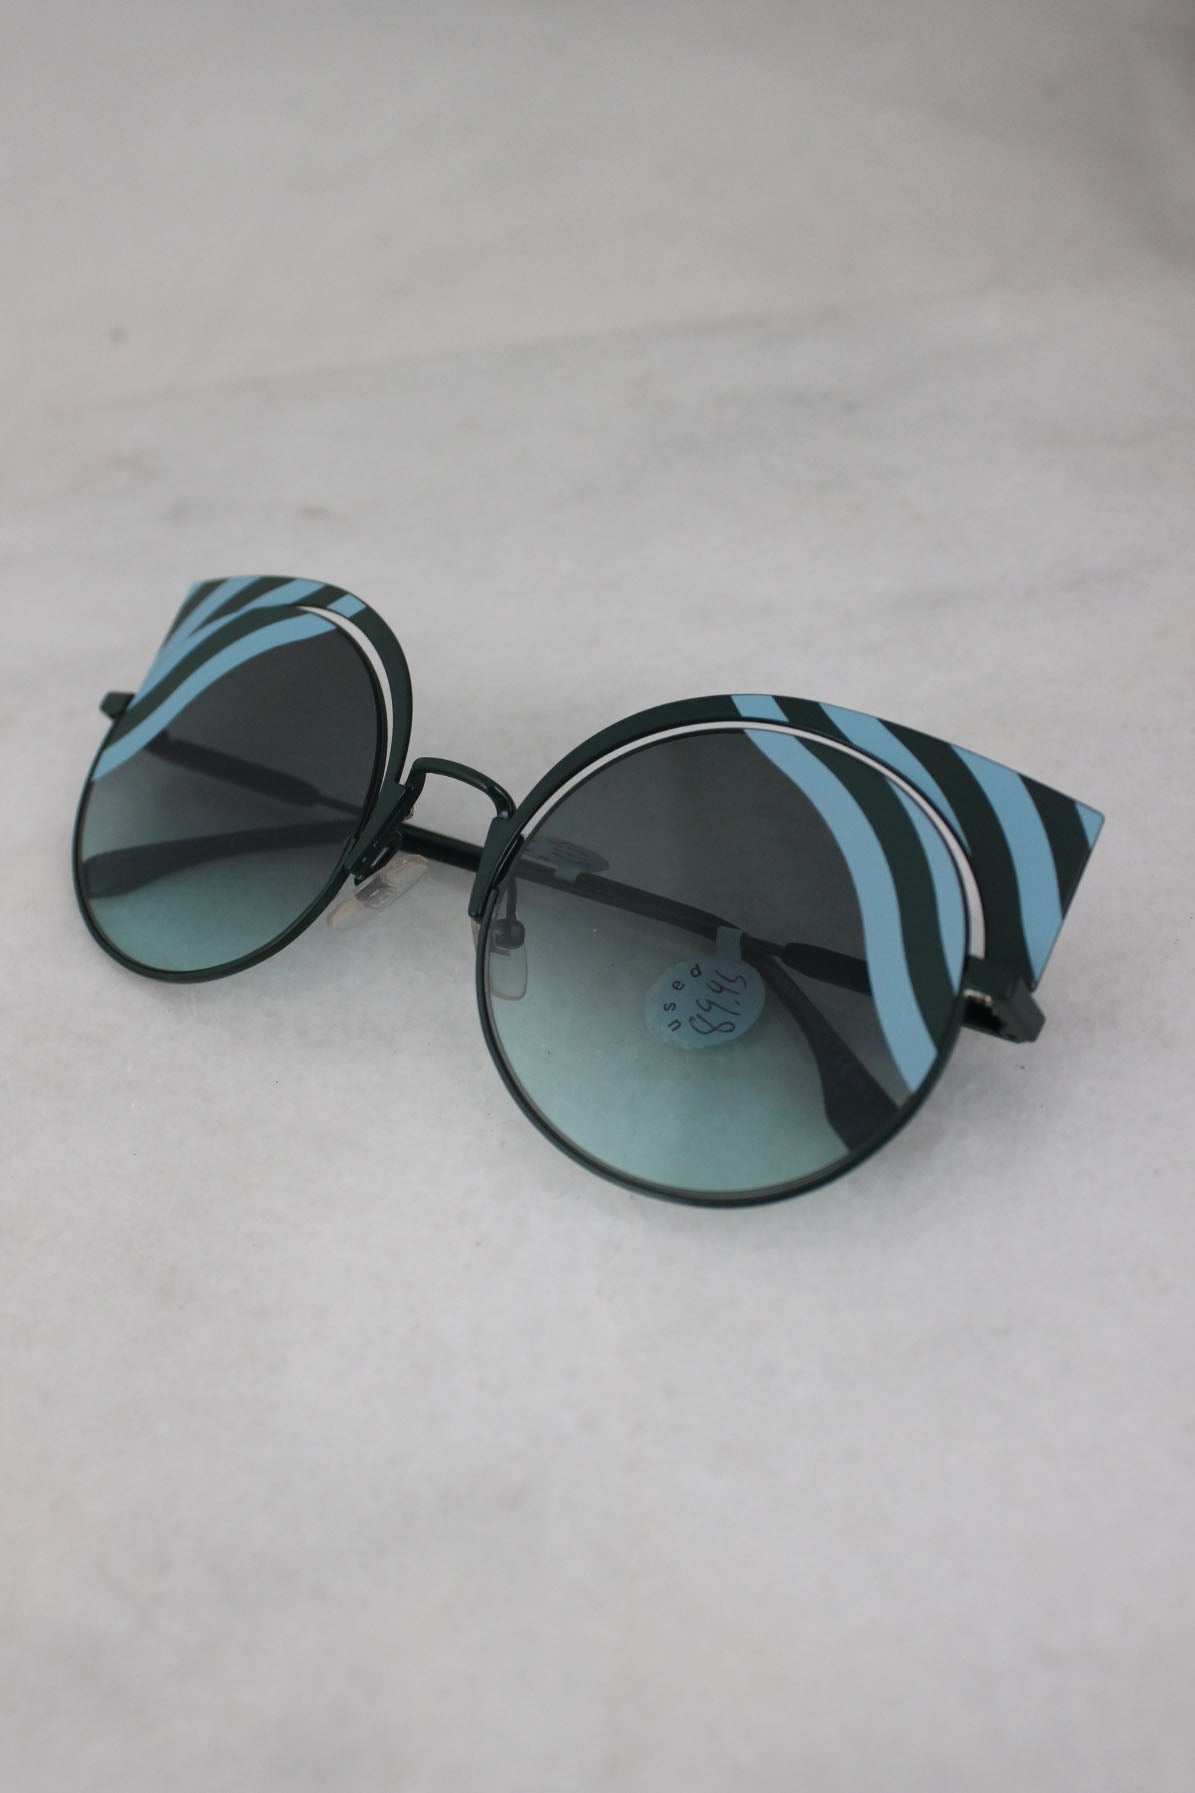 fendi "hypnoshine" green metal sunglasses. features circular blue gradient tinted lenses with metal cat eye silhouette, light blue color-blocked fluid accents that go across the lens